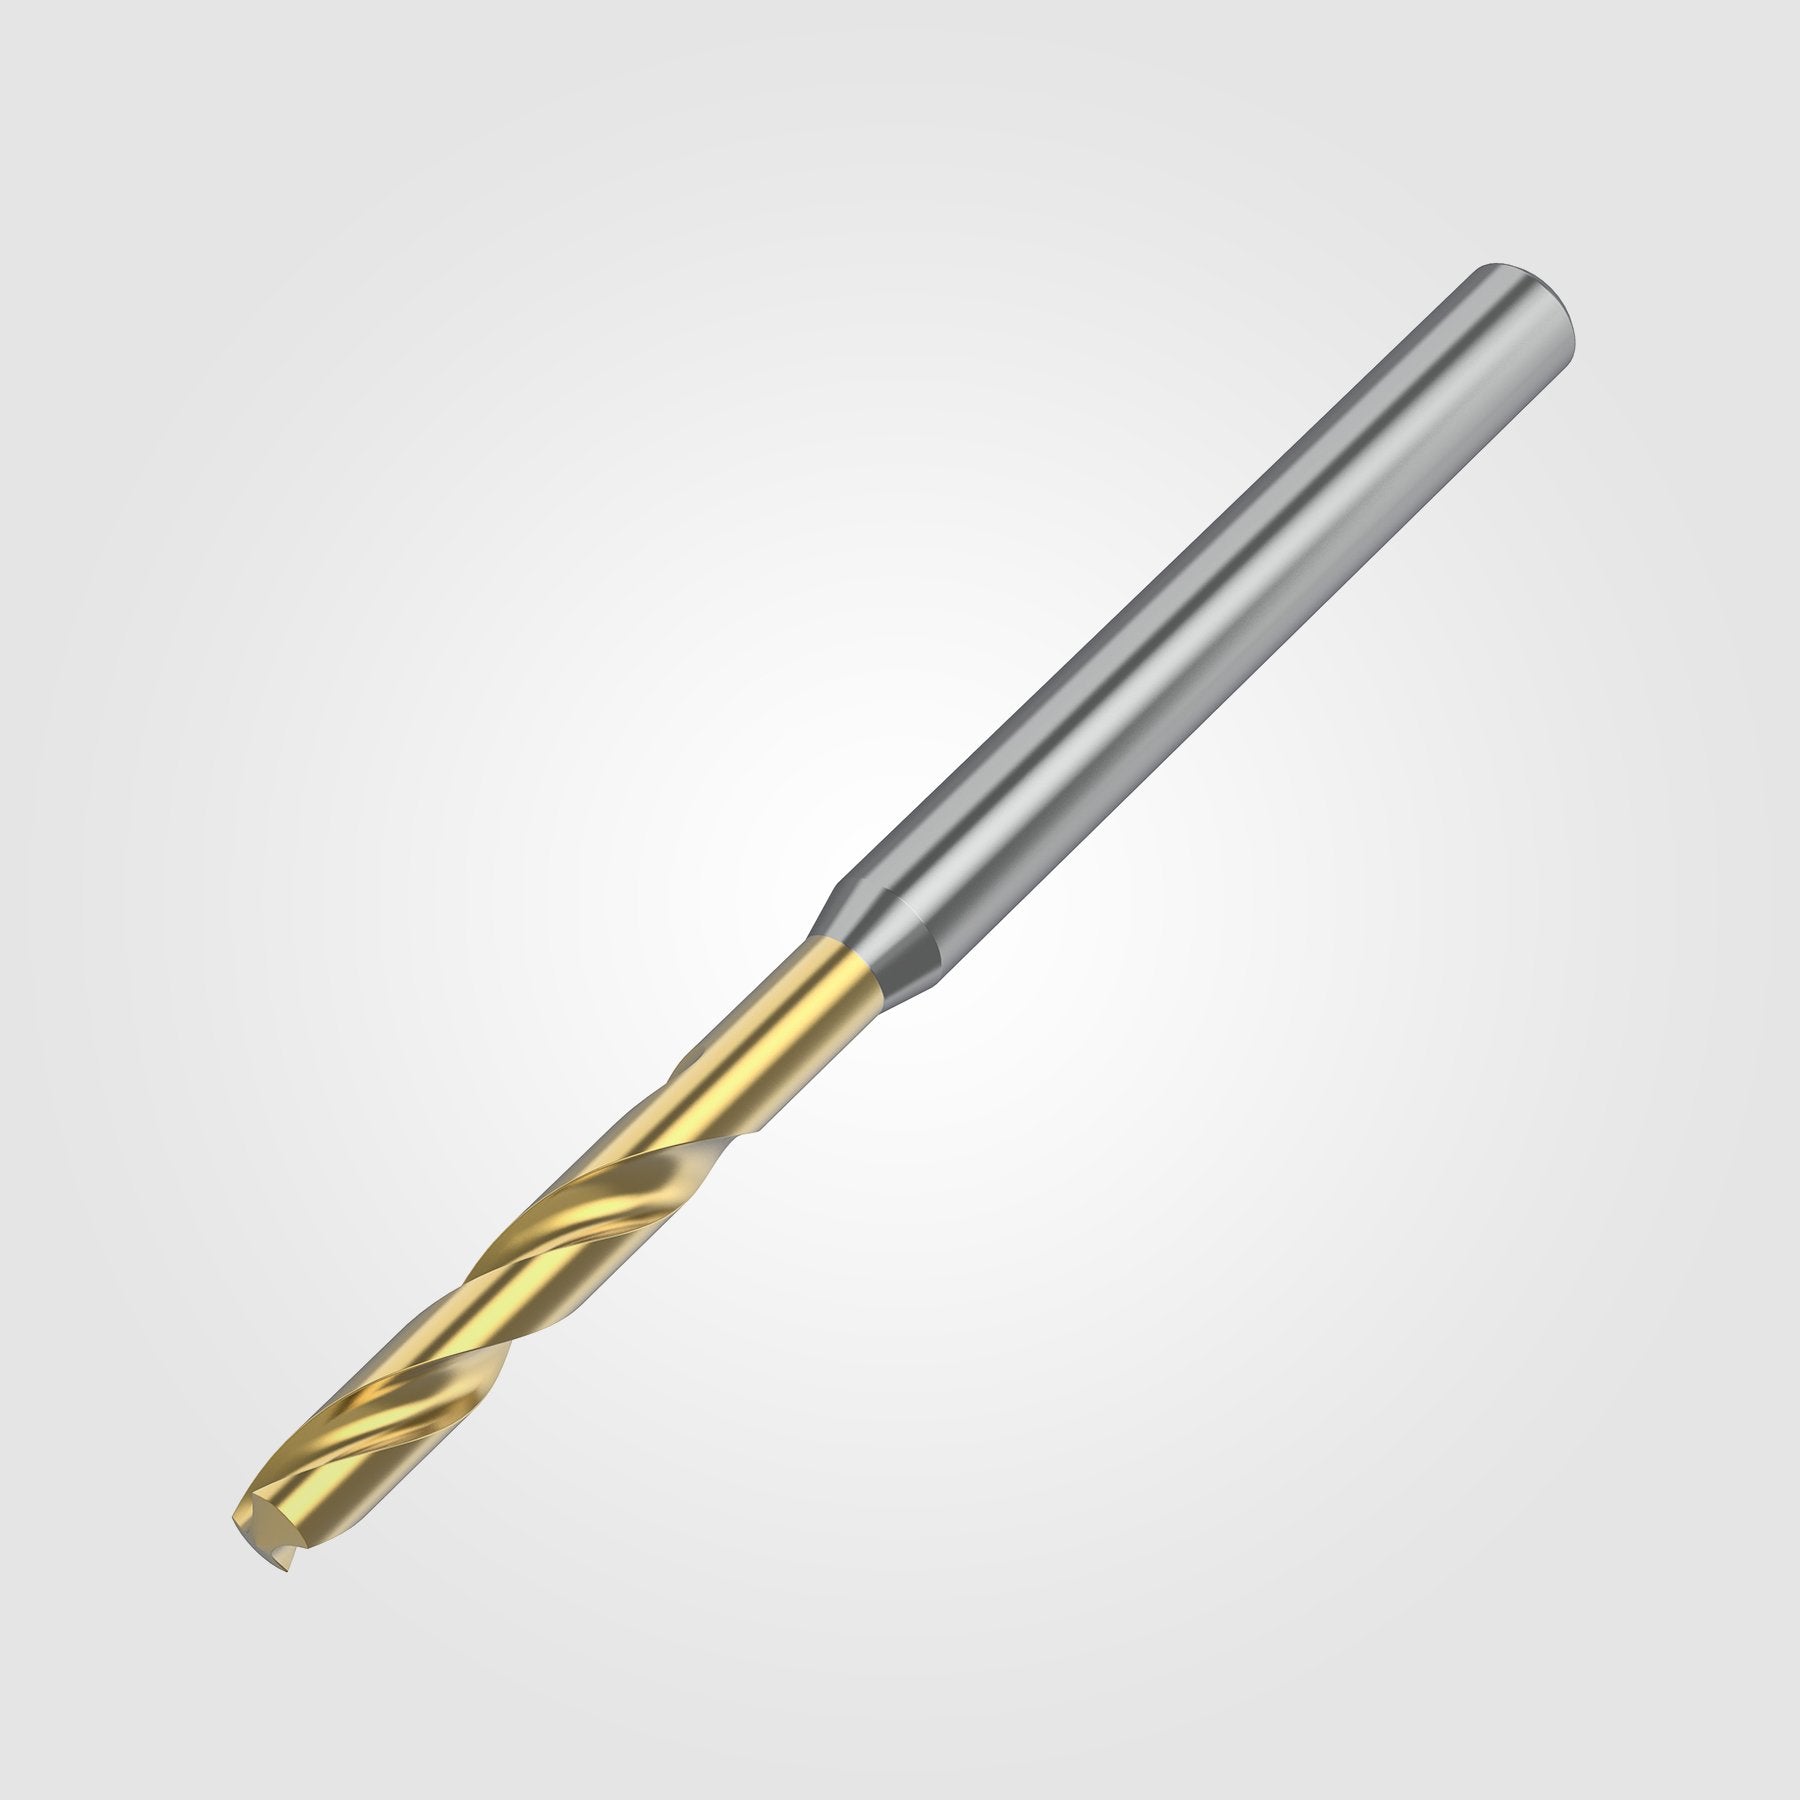 GOdrill (THROUGH COOLANT) | 8.3mm / .3268" / 5xD | SOLID CARBIDE DRILL | 4149256